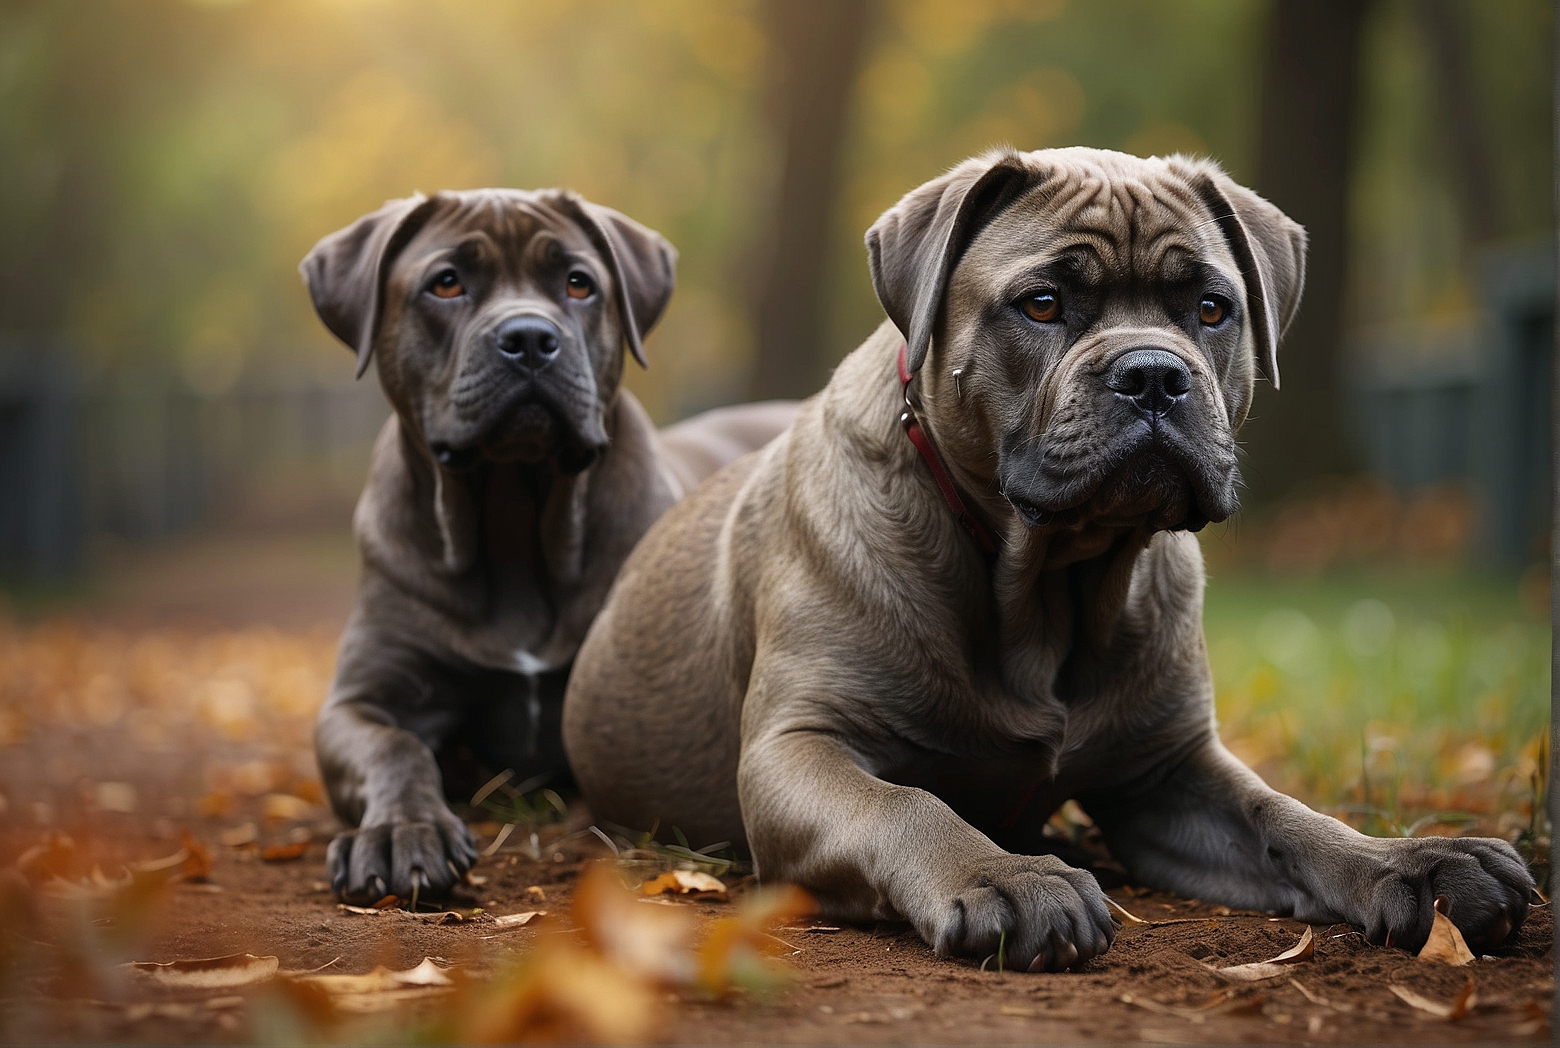 10 Things to Know About Cane Corso Dogs